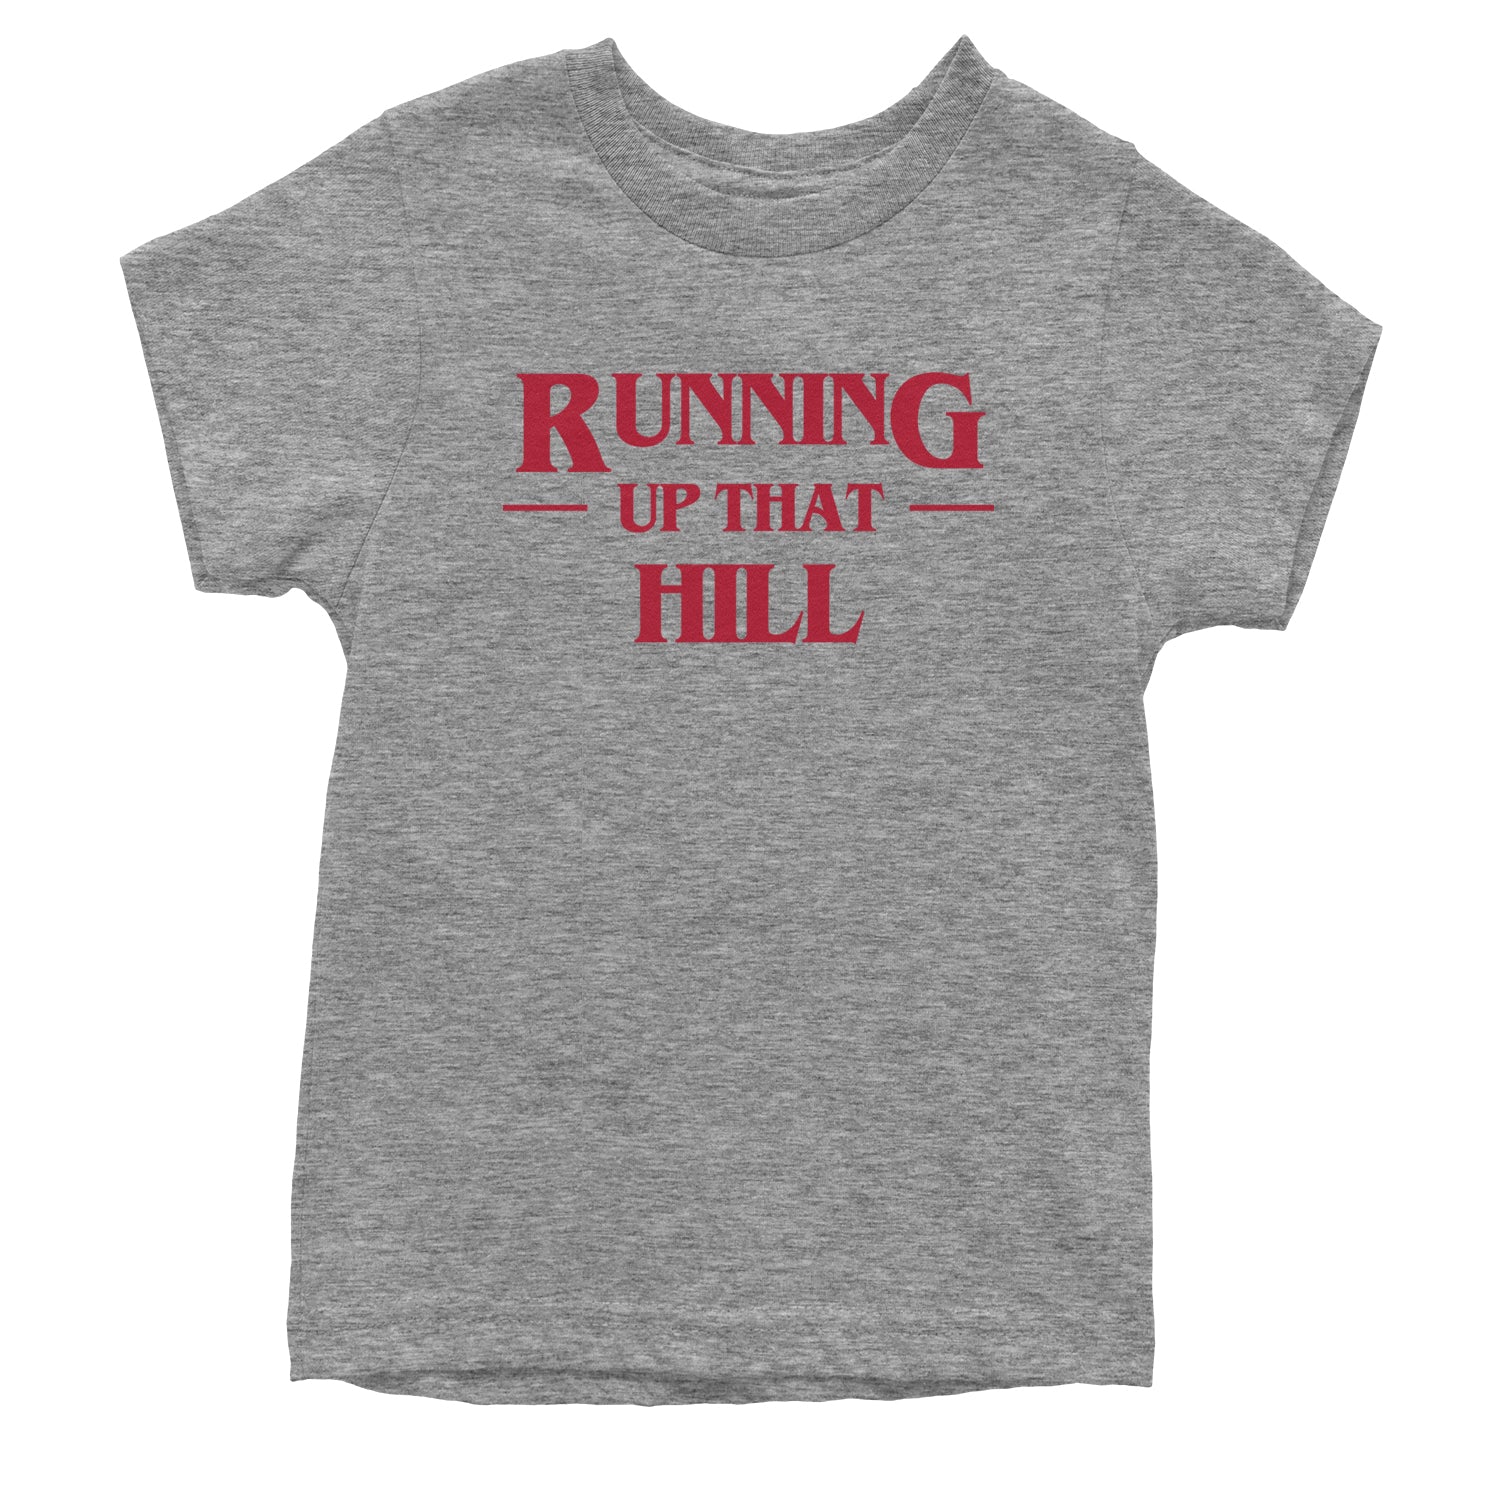 Running Up That Hill Youth T-shirt 4, don’t, eleven, four, friends, lie, season by Expression Tees